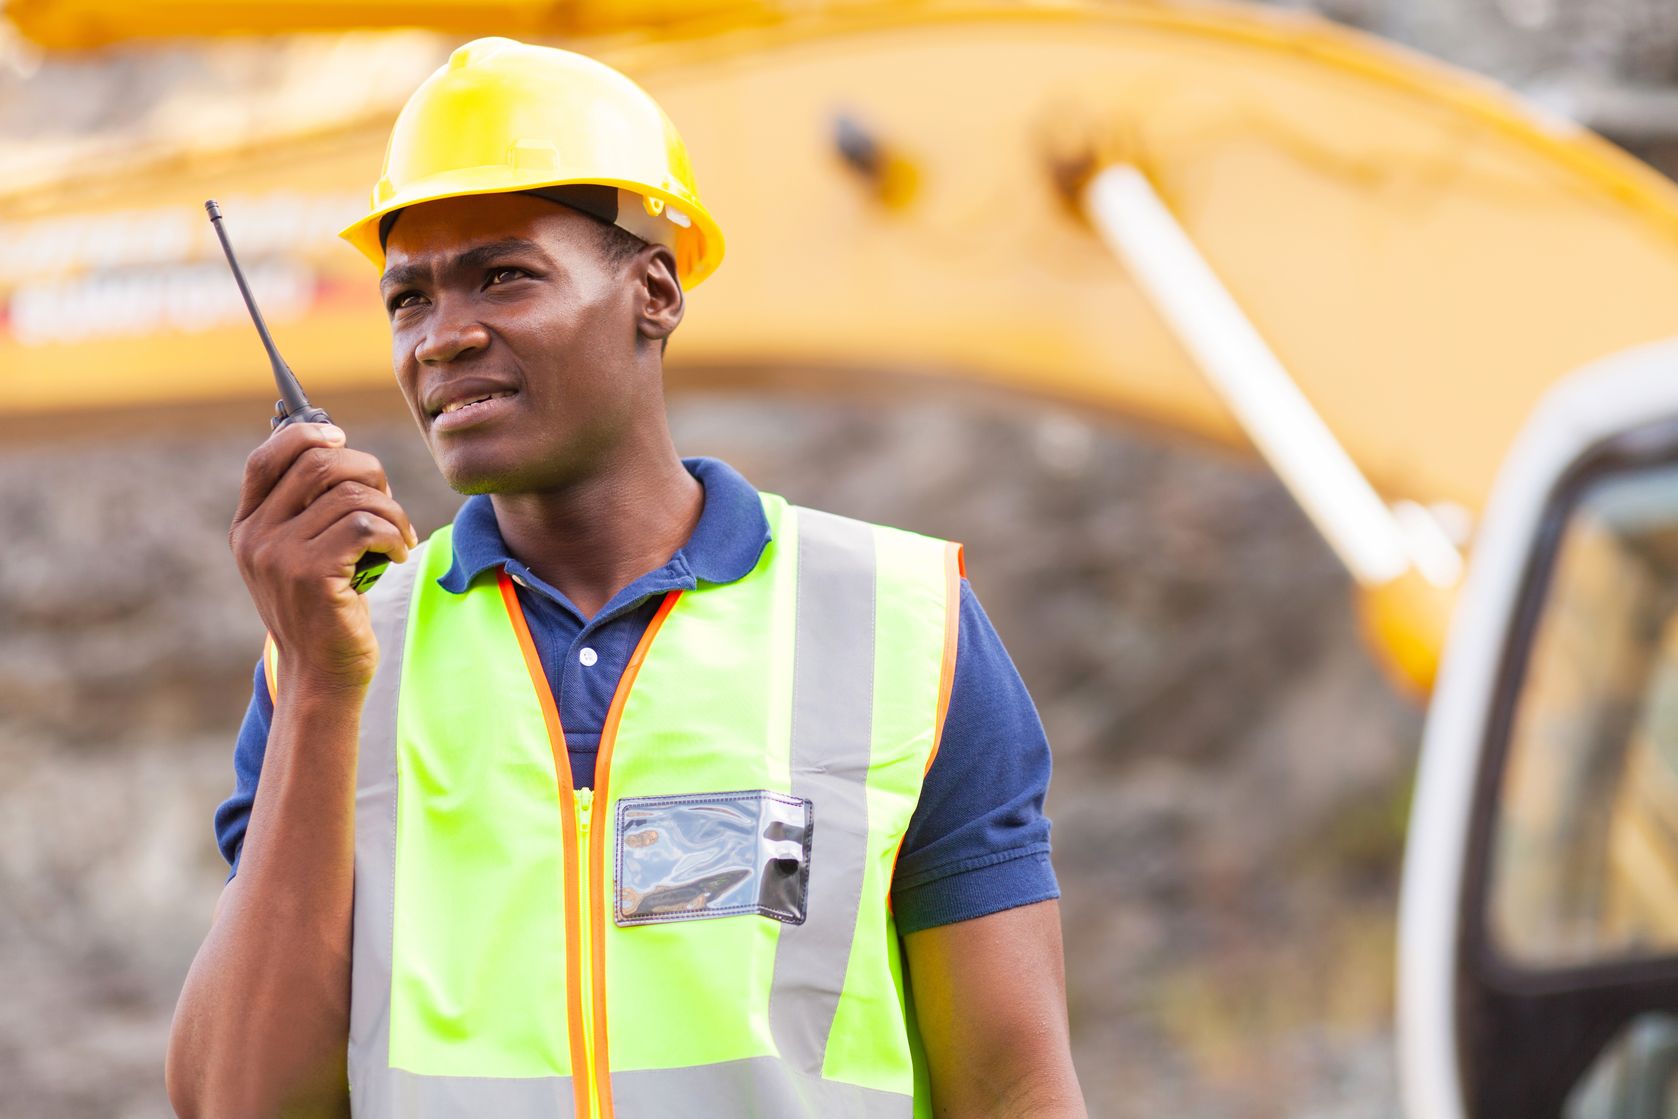 A construction worker in a hardhat and safety vest uses an RCA two-way radio while standing in front of an excavator.